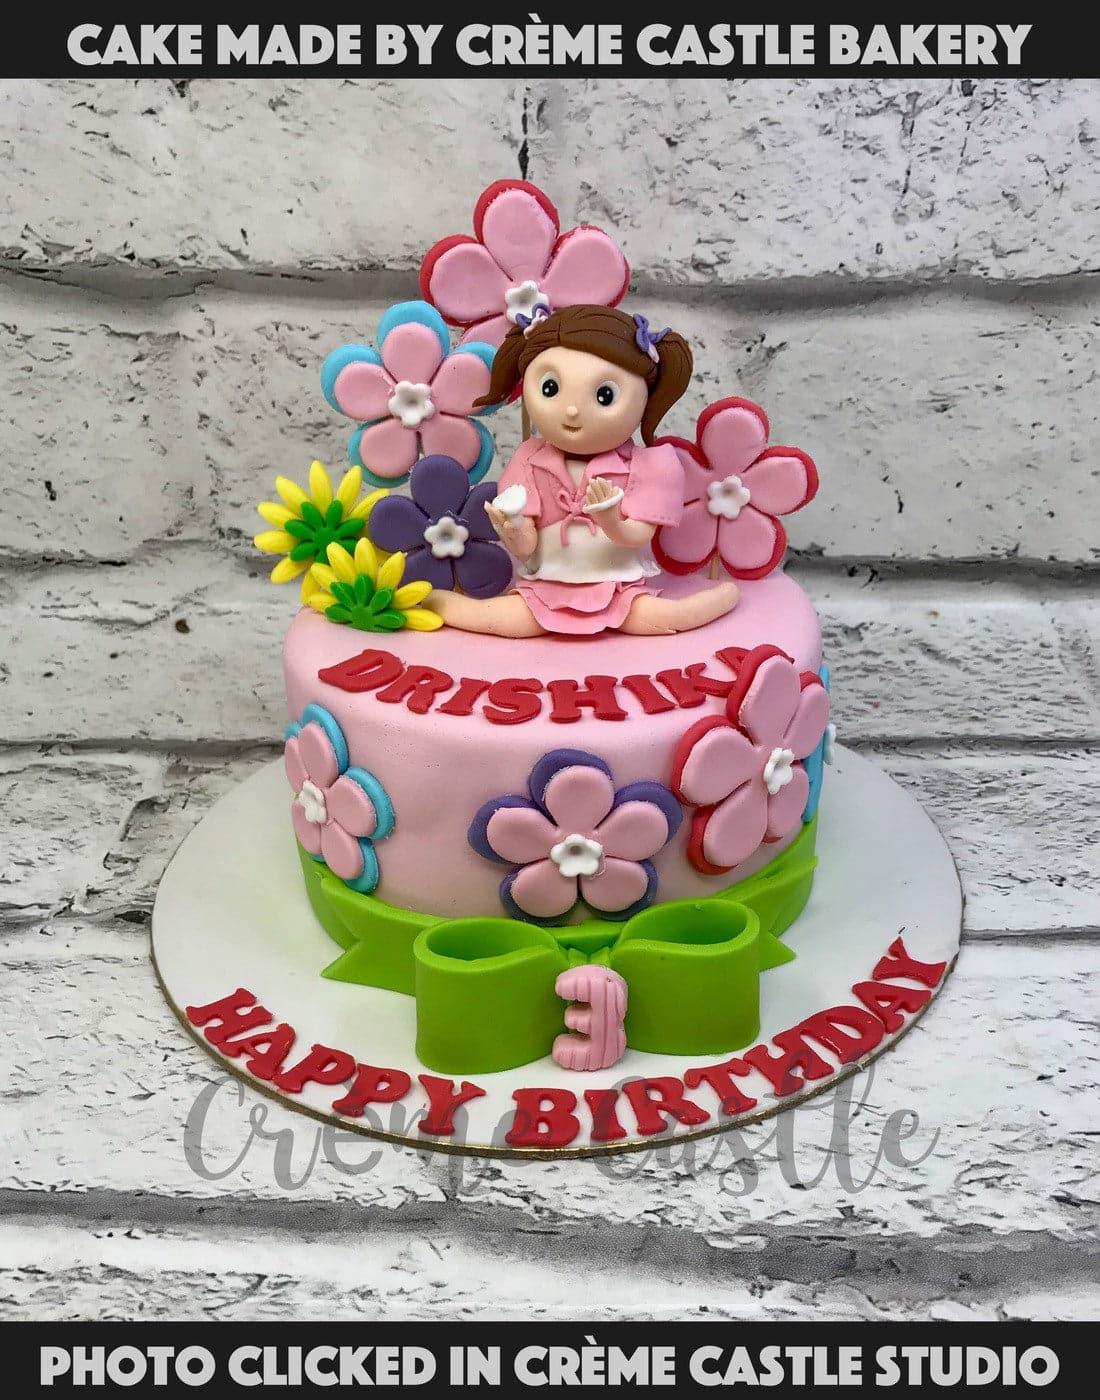 Baking Fantasies - Fondant Flower Theme Cake 🎂 Inbox Us For Booking your  orders Whatsapp 03161428286 #BakingFantasies #cake #cakes #cakelover  #cakelife #cakepops #cakelife #cakelover #cakedesigns #birthday | Facebook